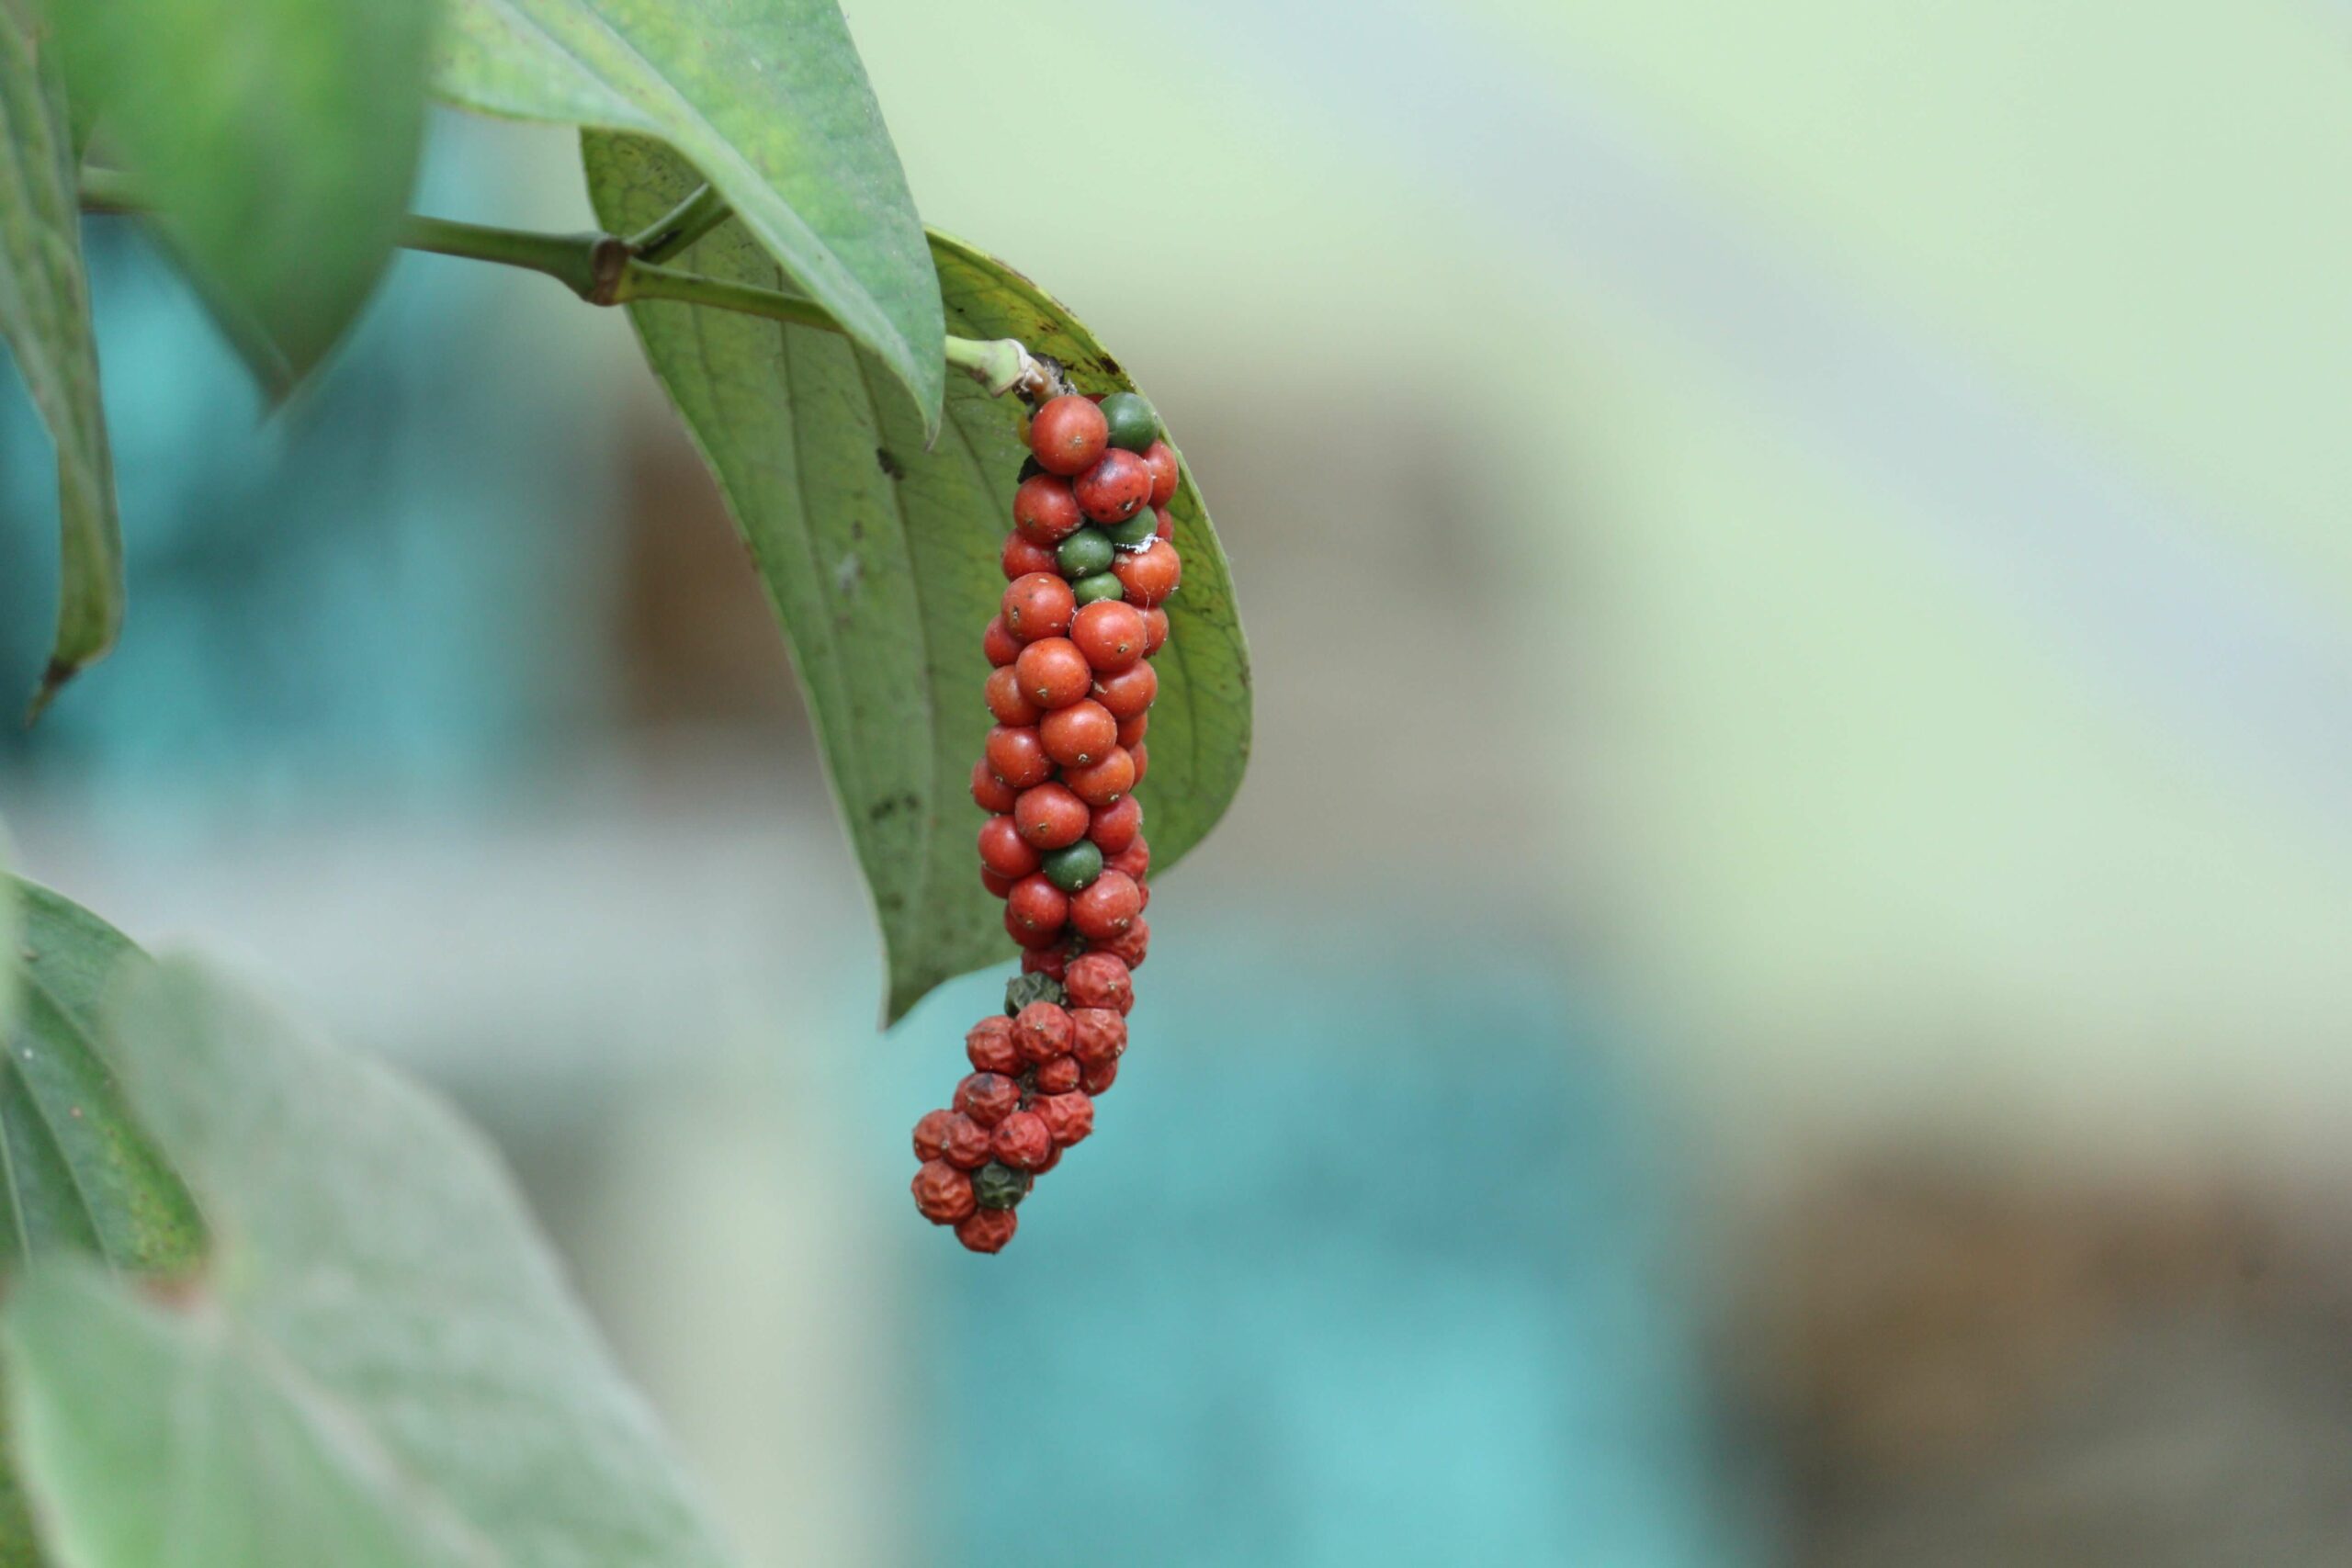 An image of a red berry that is used for the production of pepper.